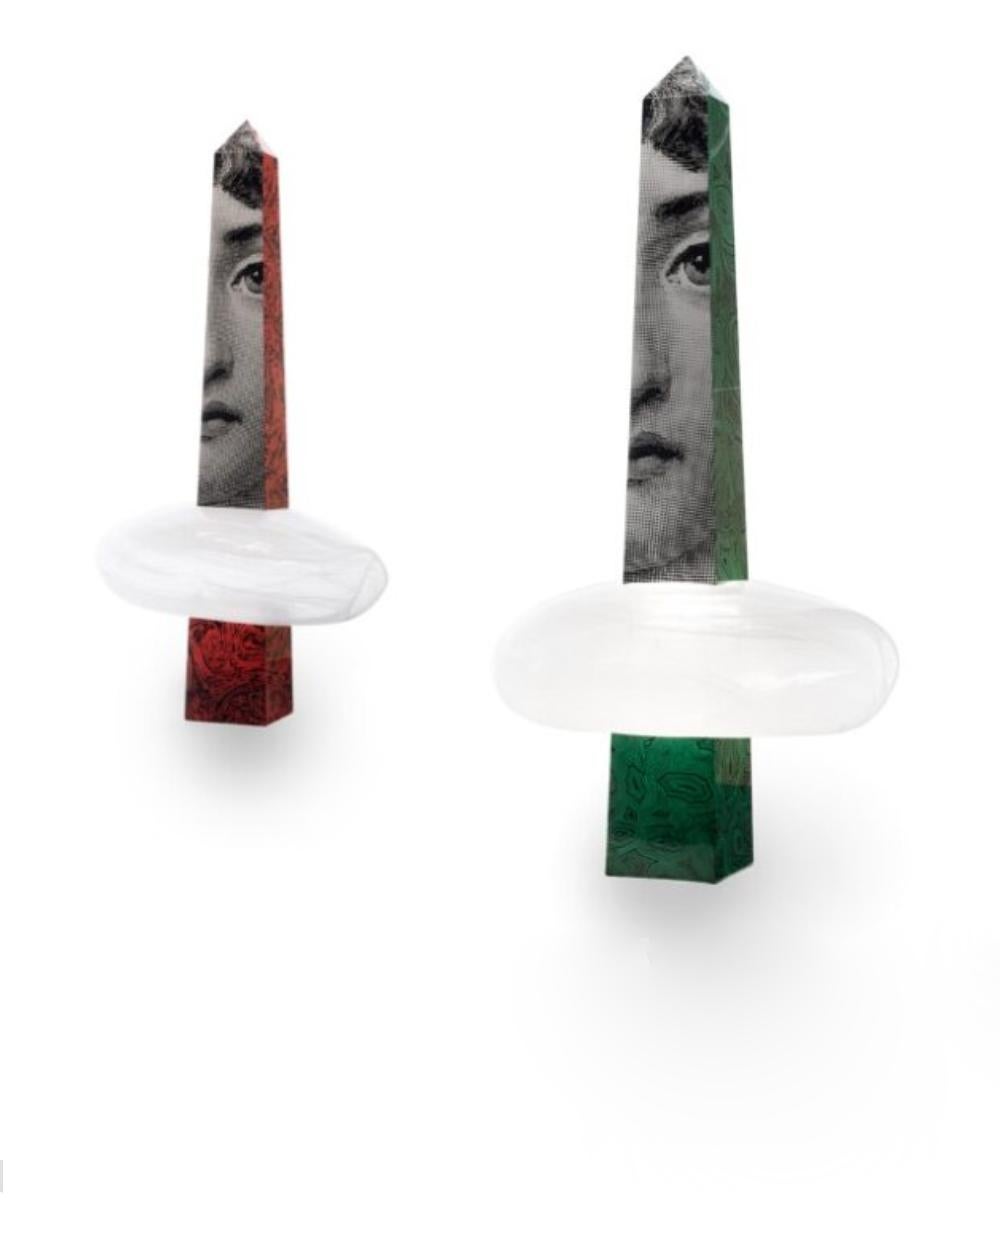 Designed by the iconic Italian decorative firm, Atelier Fornasetti, Through The Clouds takes inspiration from daydreaming. Delicate glass clouds float above the viewer, suggesting divine perspective. Obelisks protrude from the clouds, nodding to the